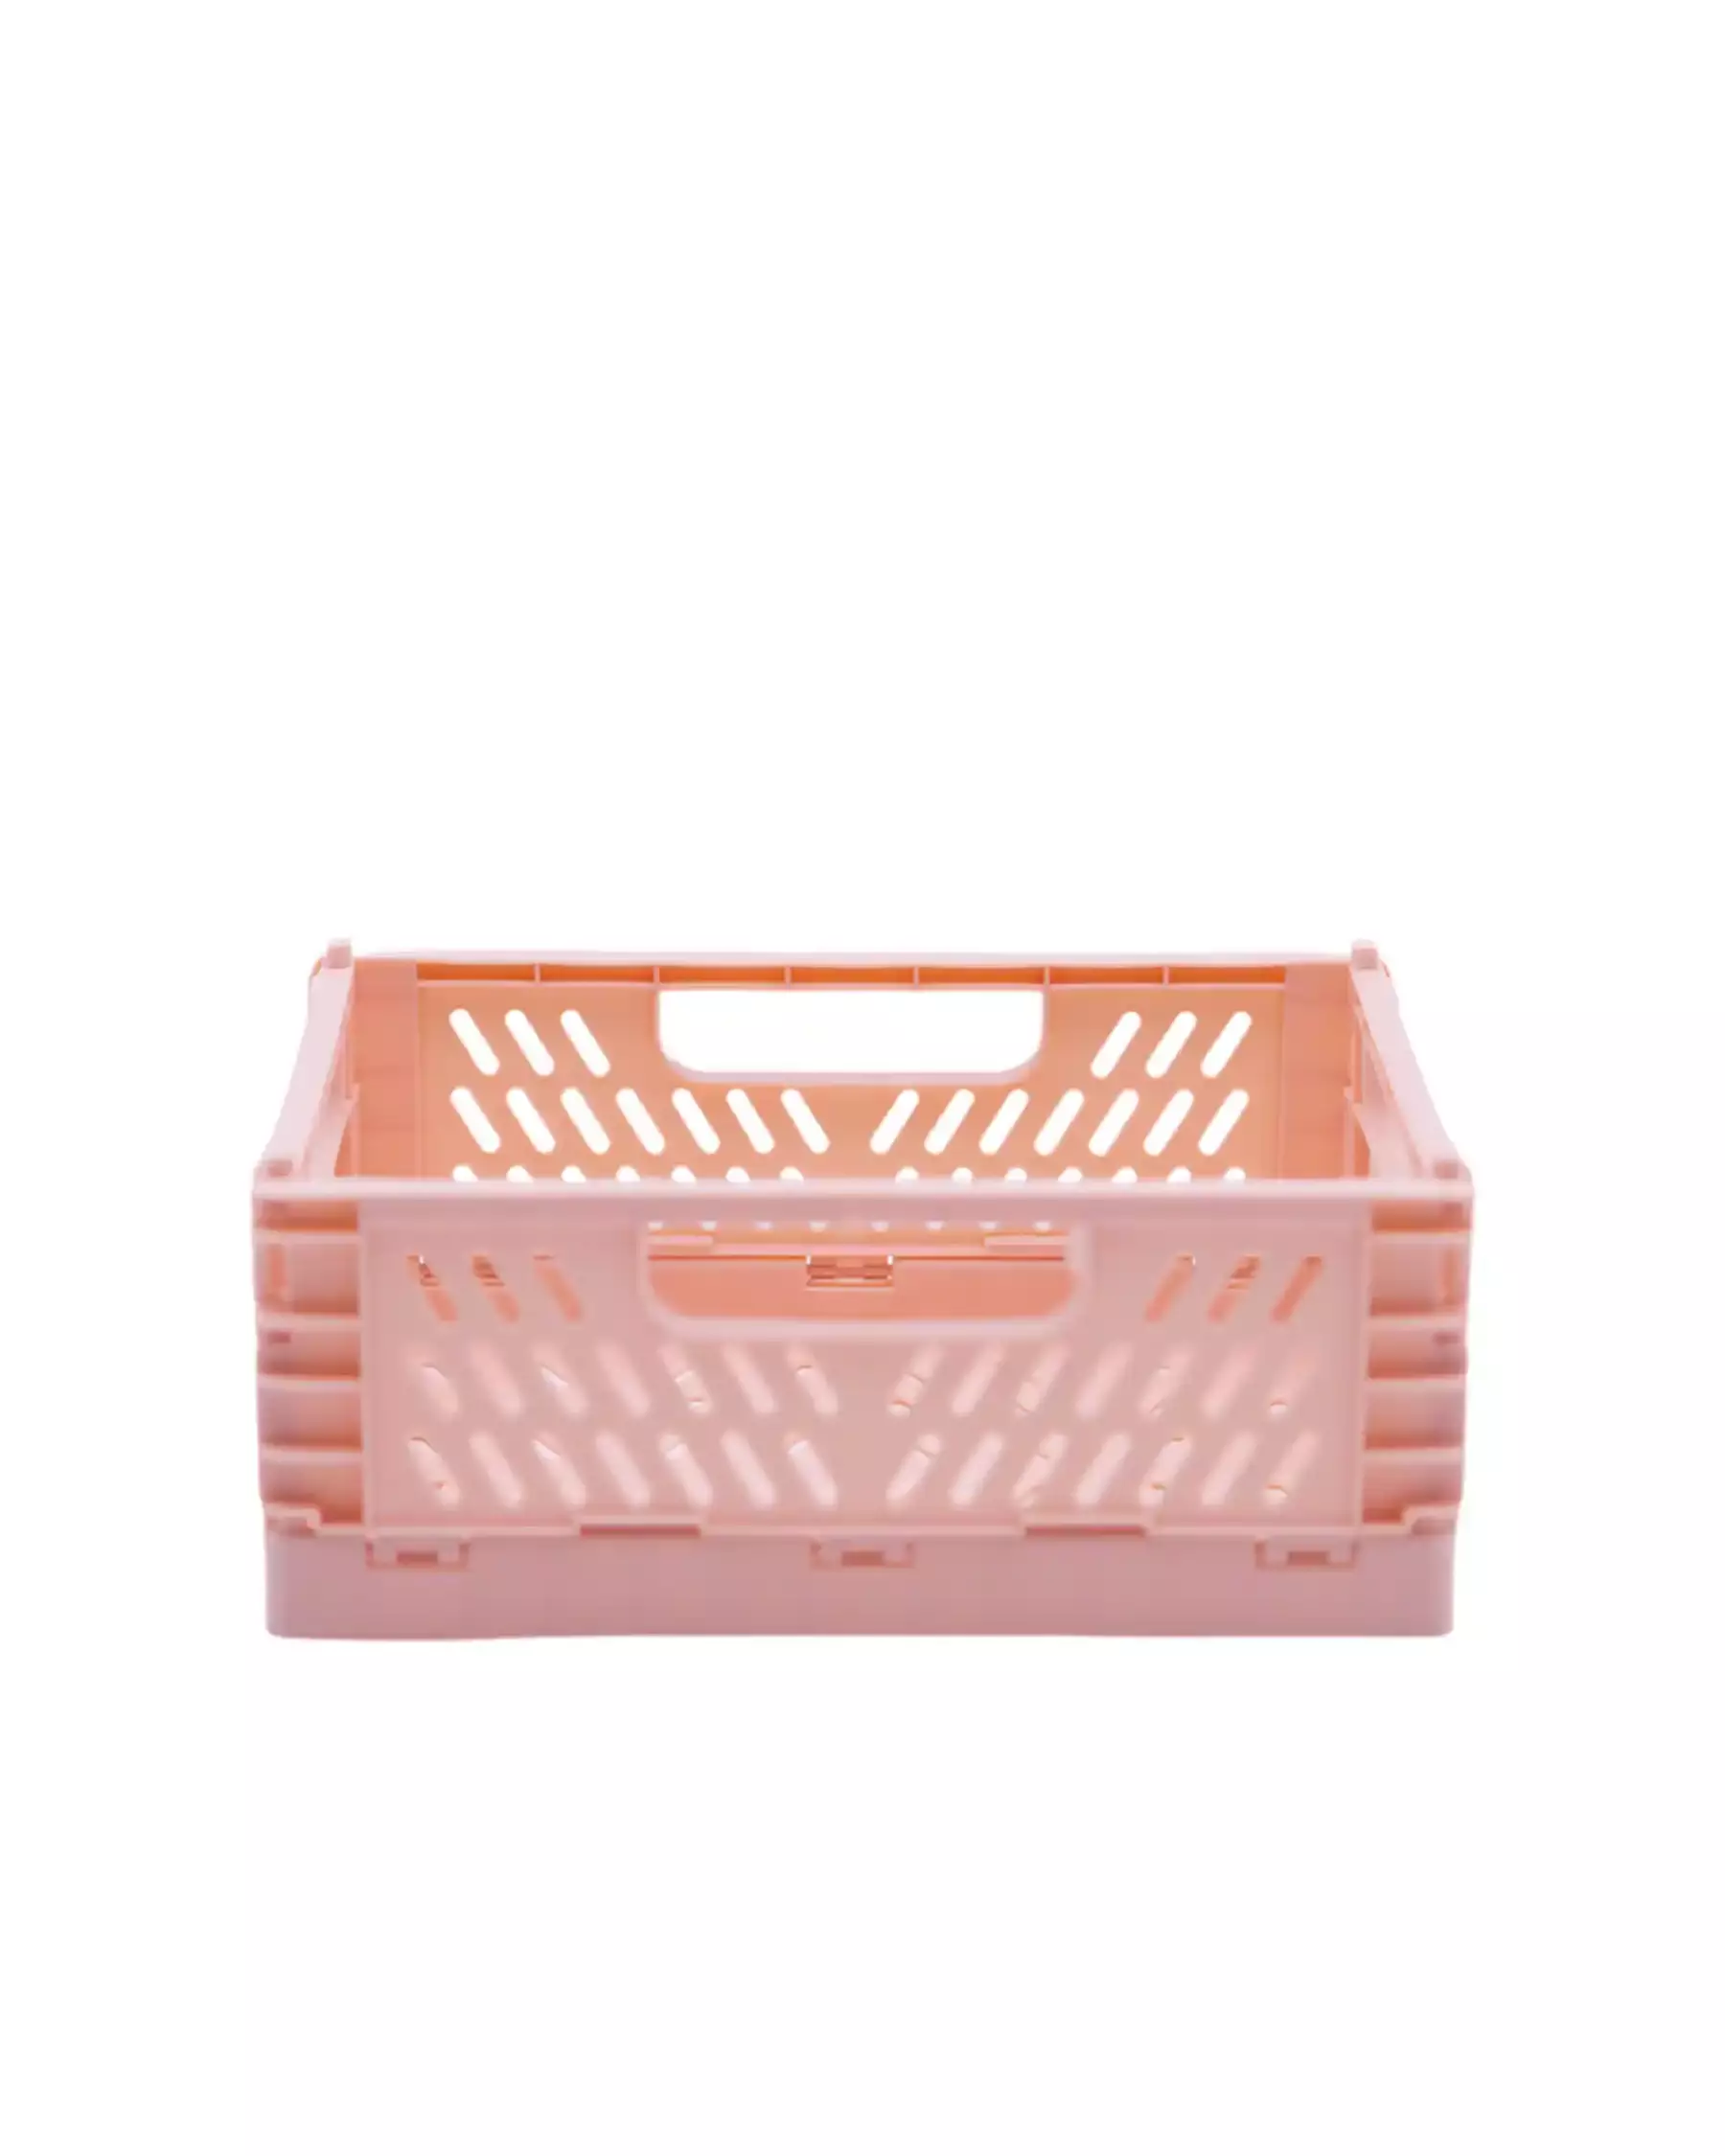 This is an expanded pink plastic foldable organization basket